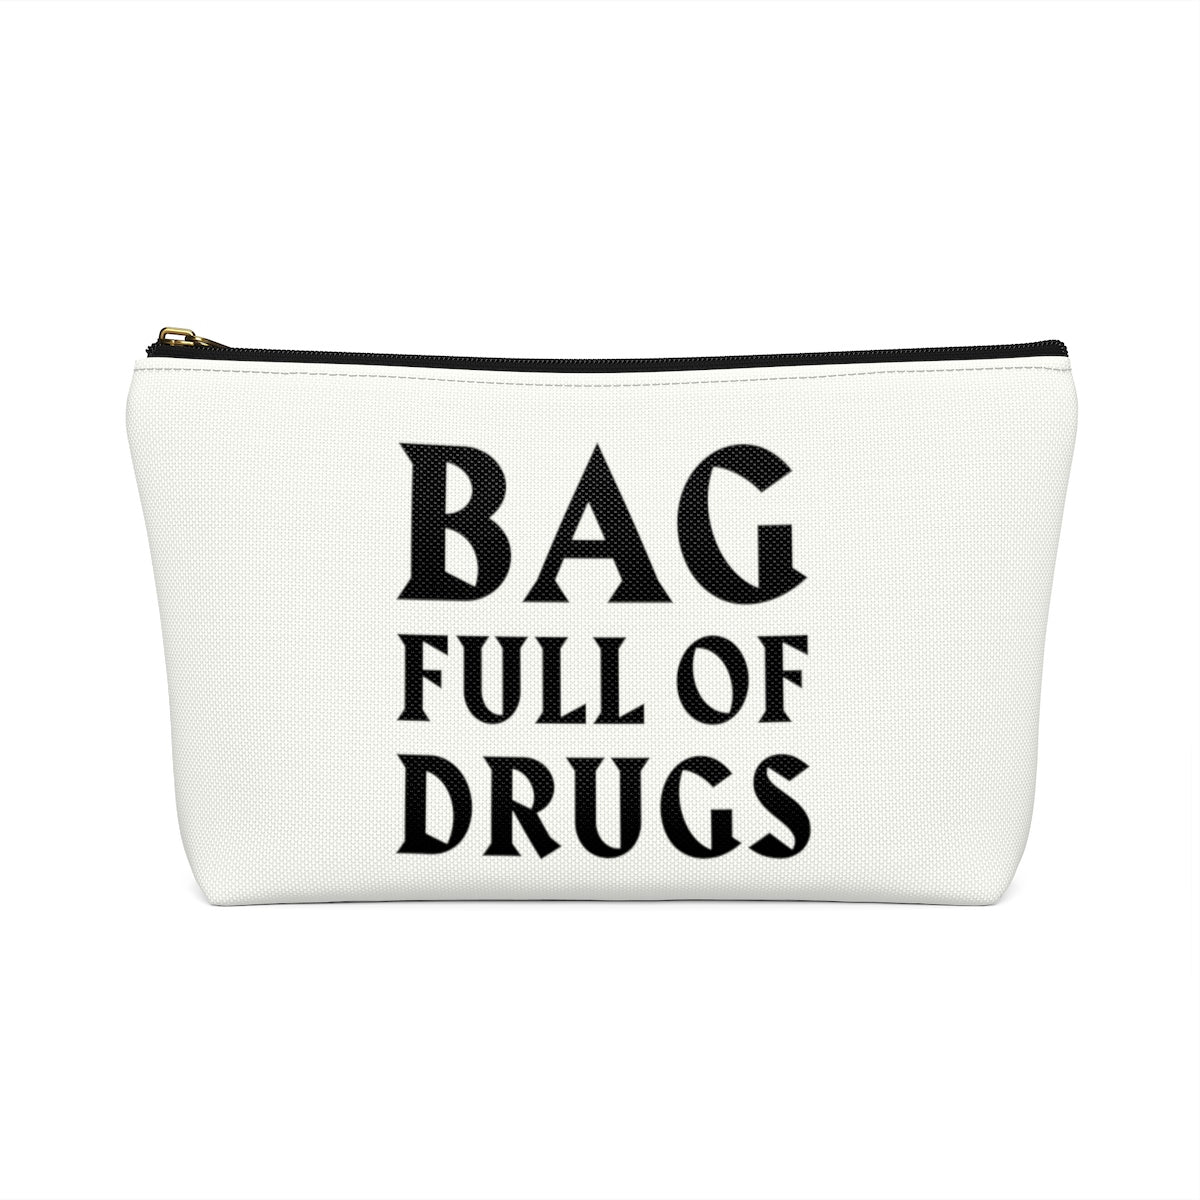 Bag Full of Drugs Medical Bag, Funny Medicinal Hospital Sick Men Gift Supply Case Accessory Medication Get Well Travel Zipper Canvas Pouch w T-bottom Starcove Fashion